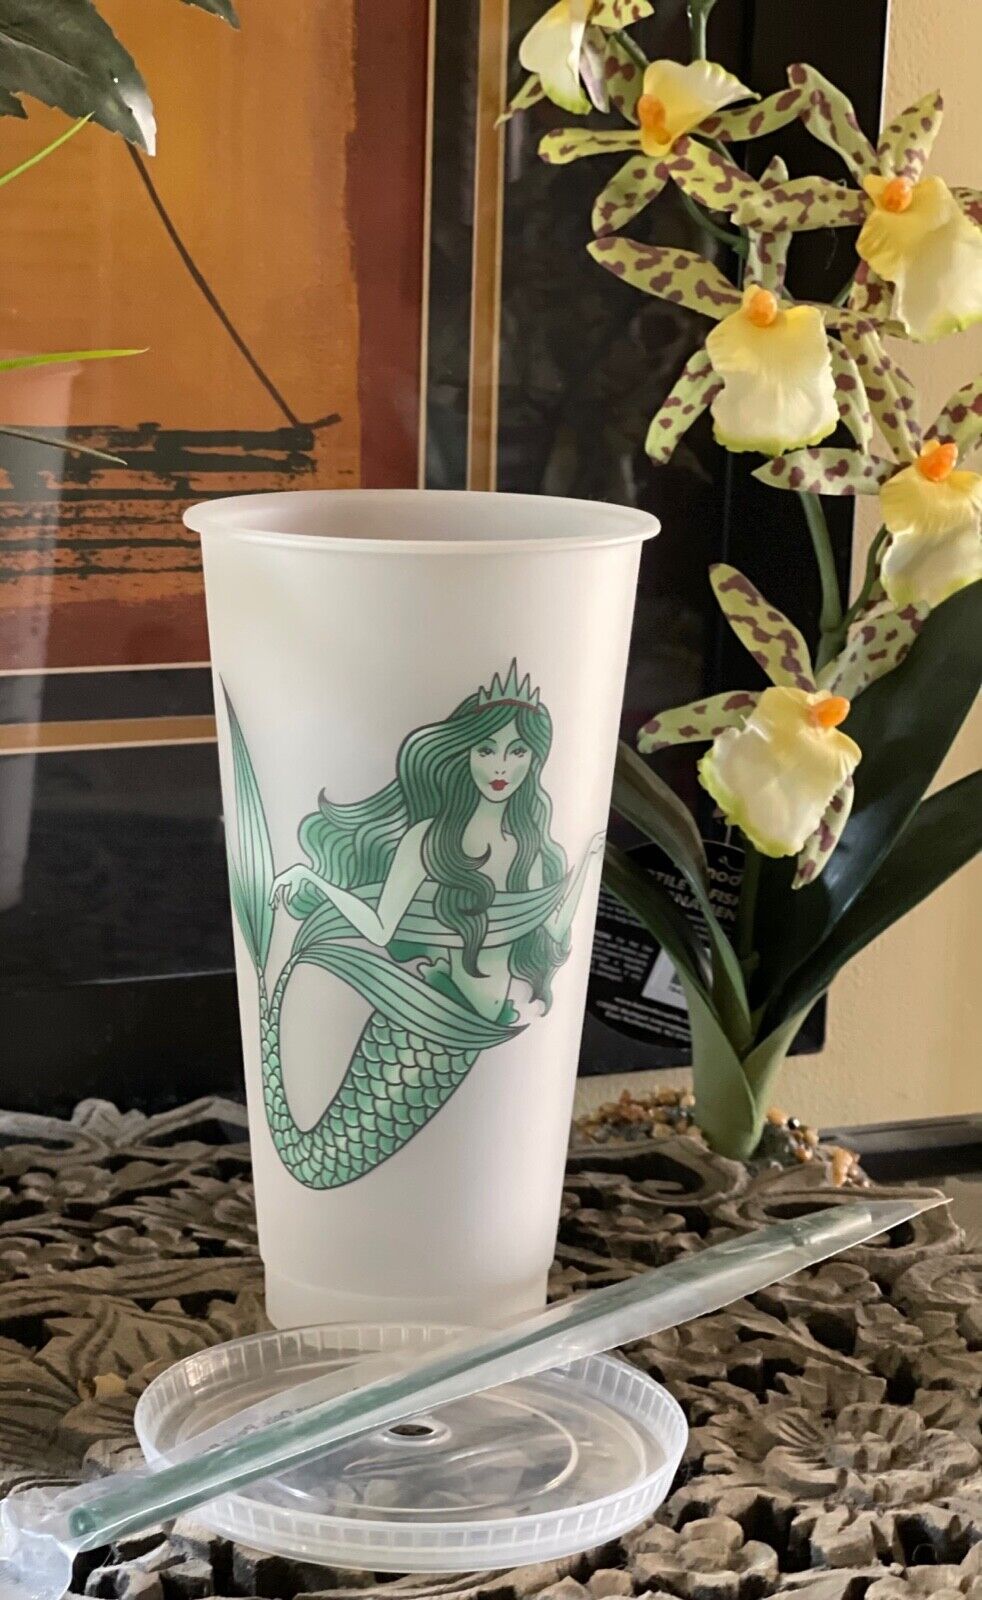 NEW Starbucks Mermaid Siren Reusable Cold Cup Venti 24oz w/green straw and lid